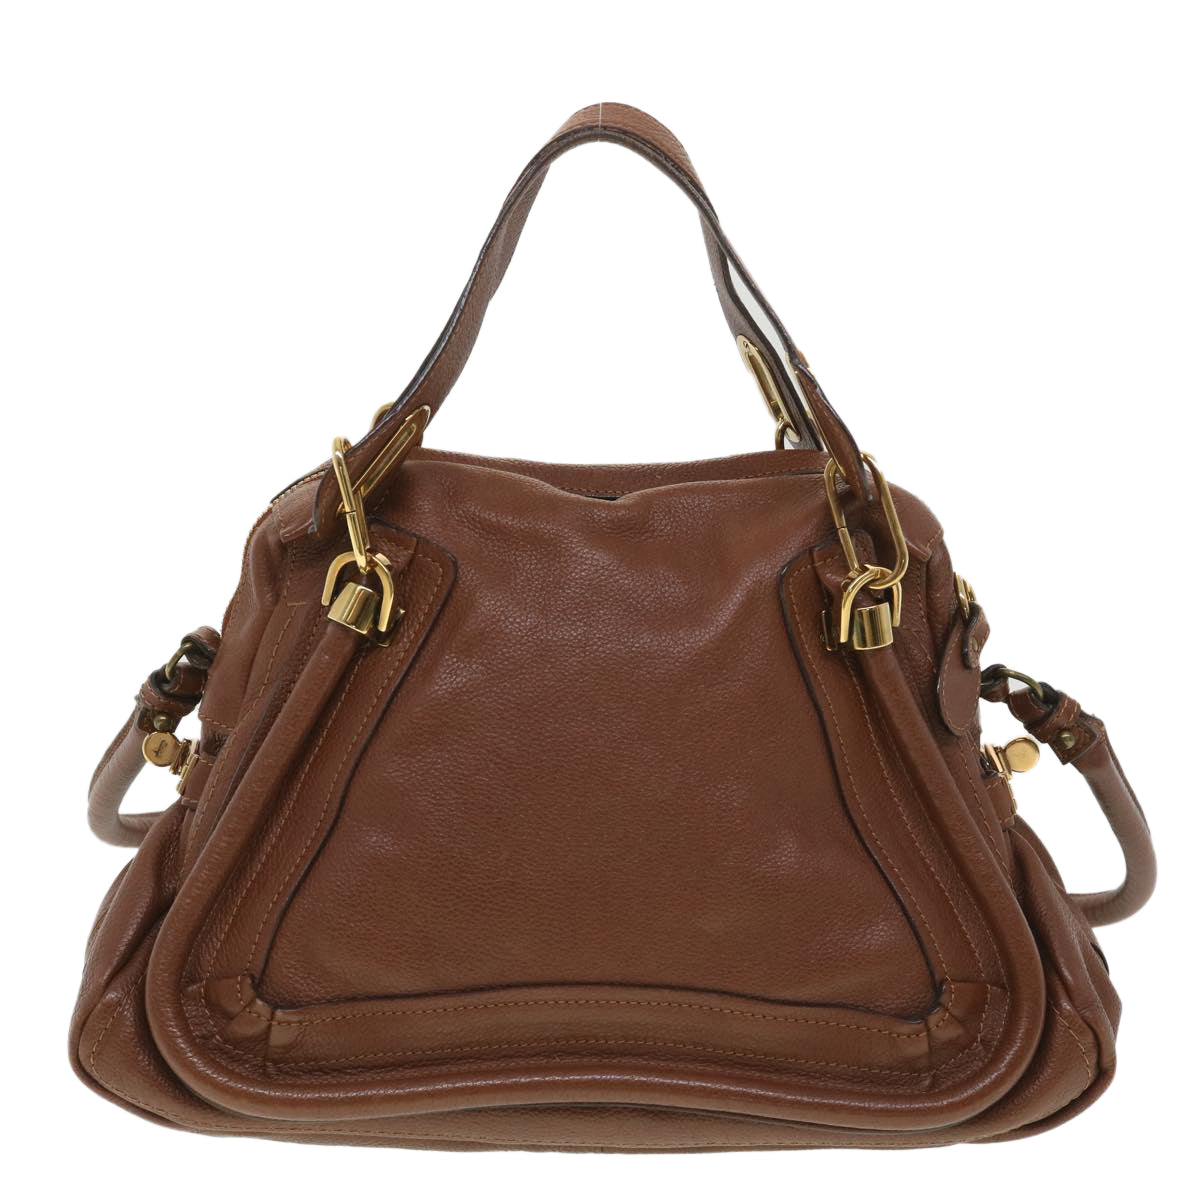 Chloe Paraty Hand Bag Leather 2way Brown Auth 37965 - 0